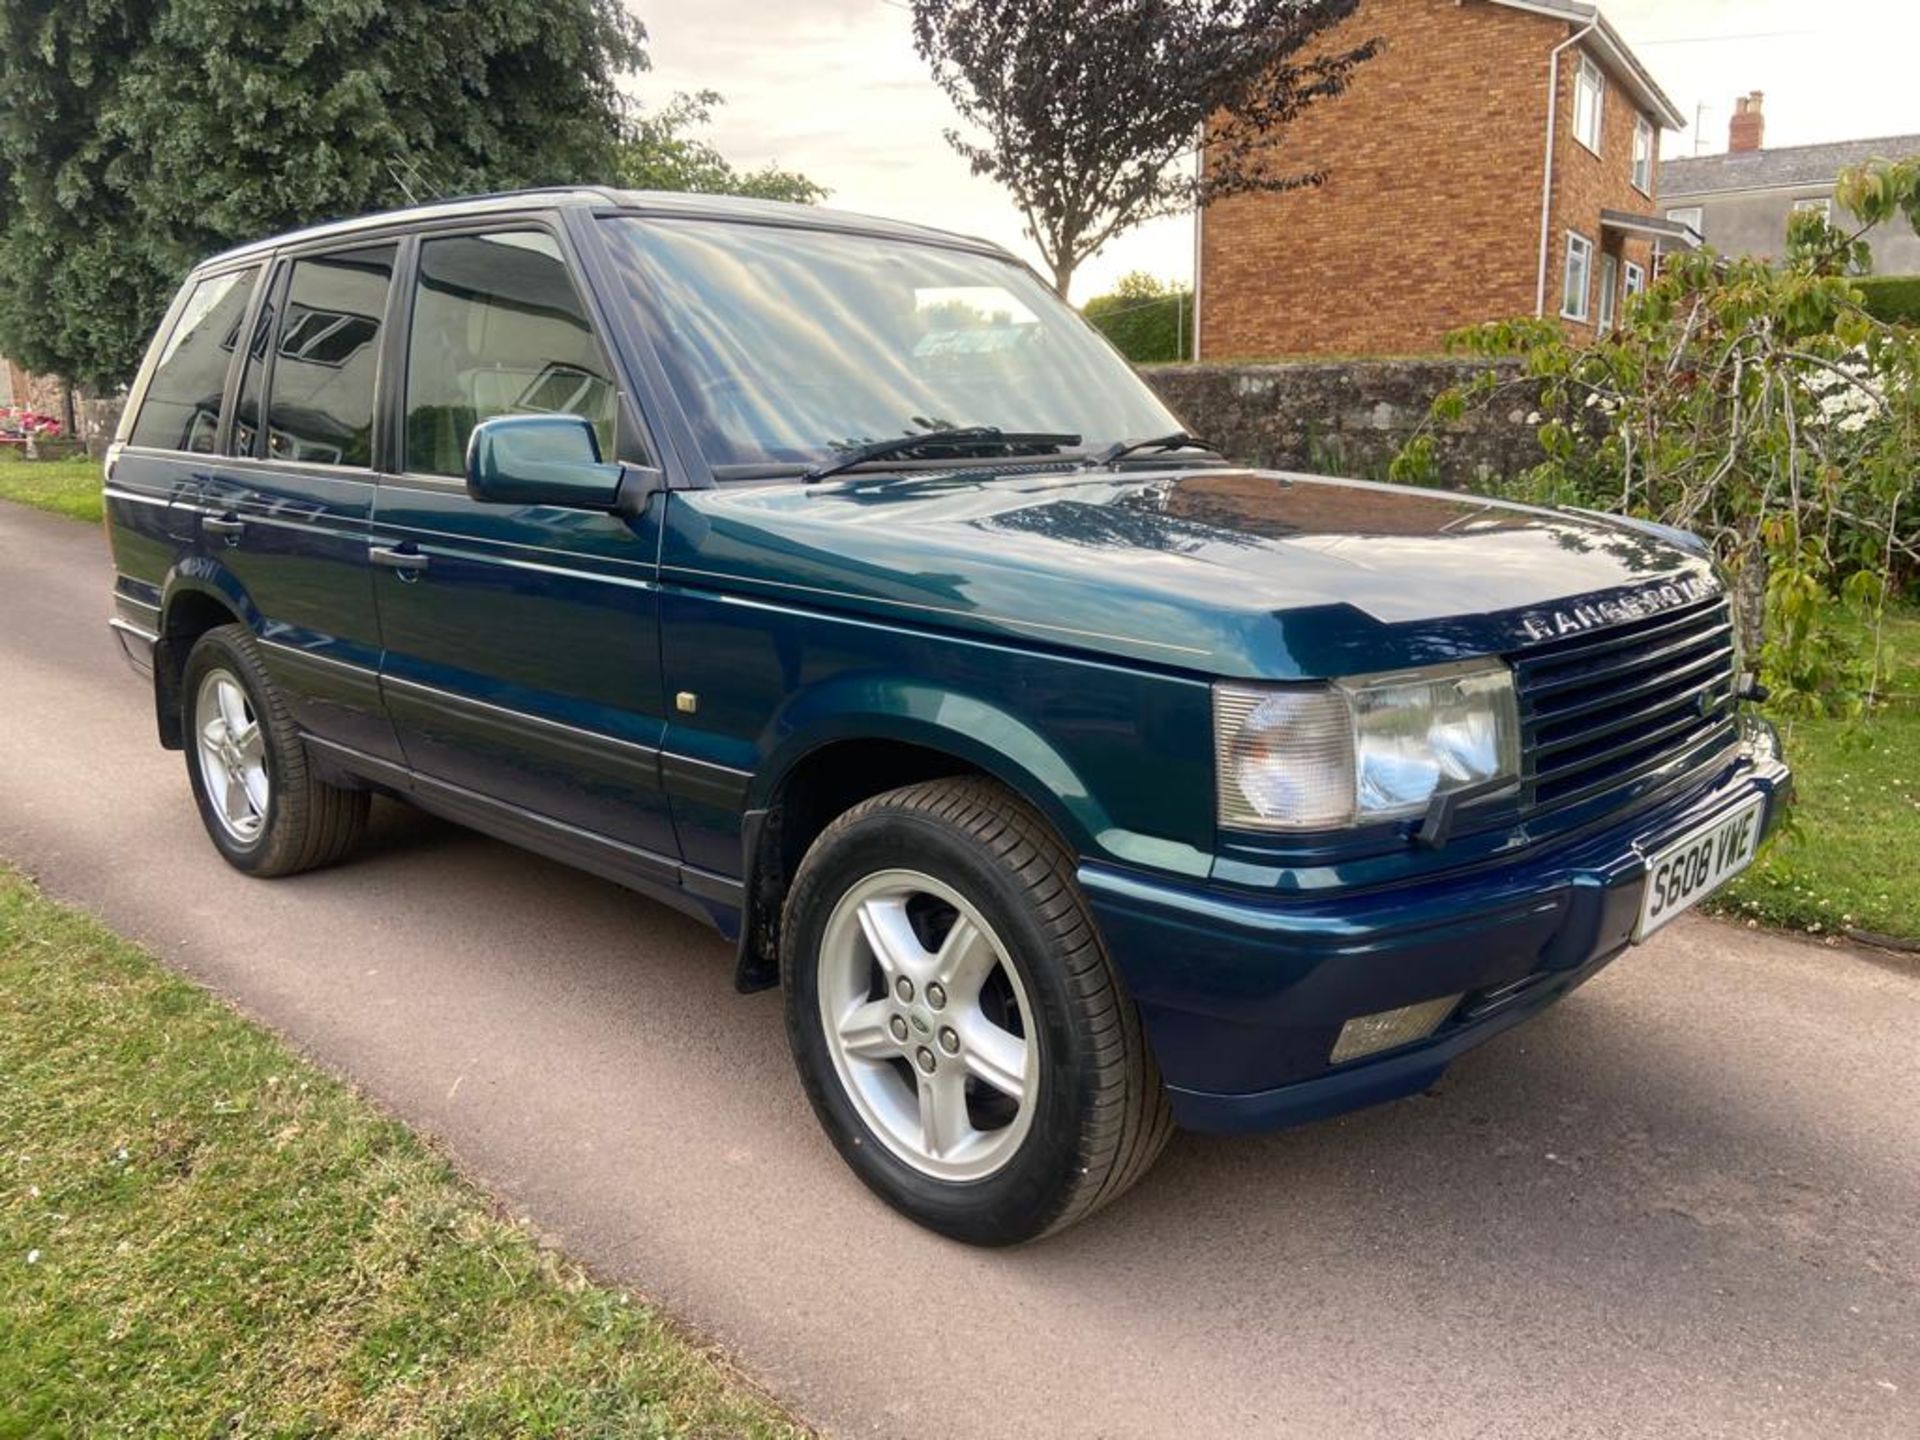 1998 Limited Edition Range Rover P38 - Image 23 of 39